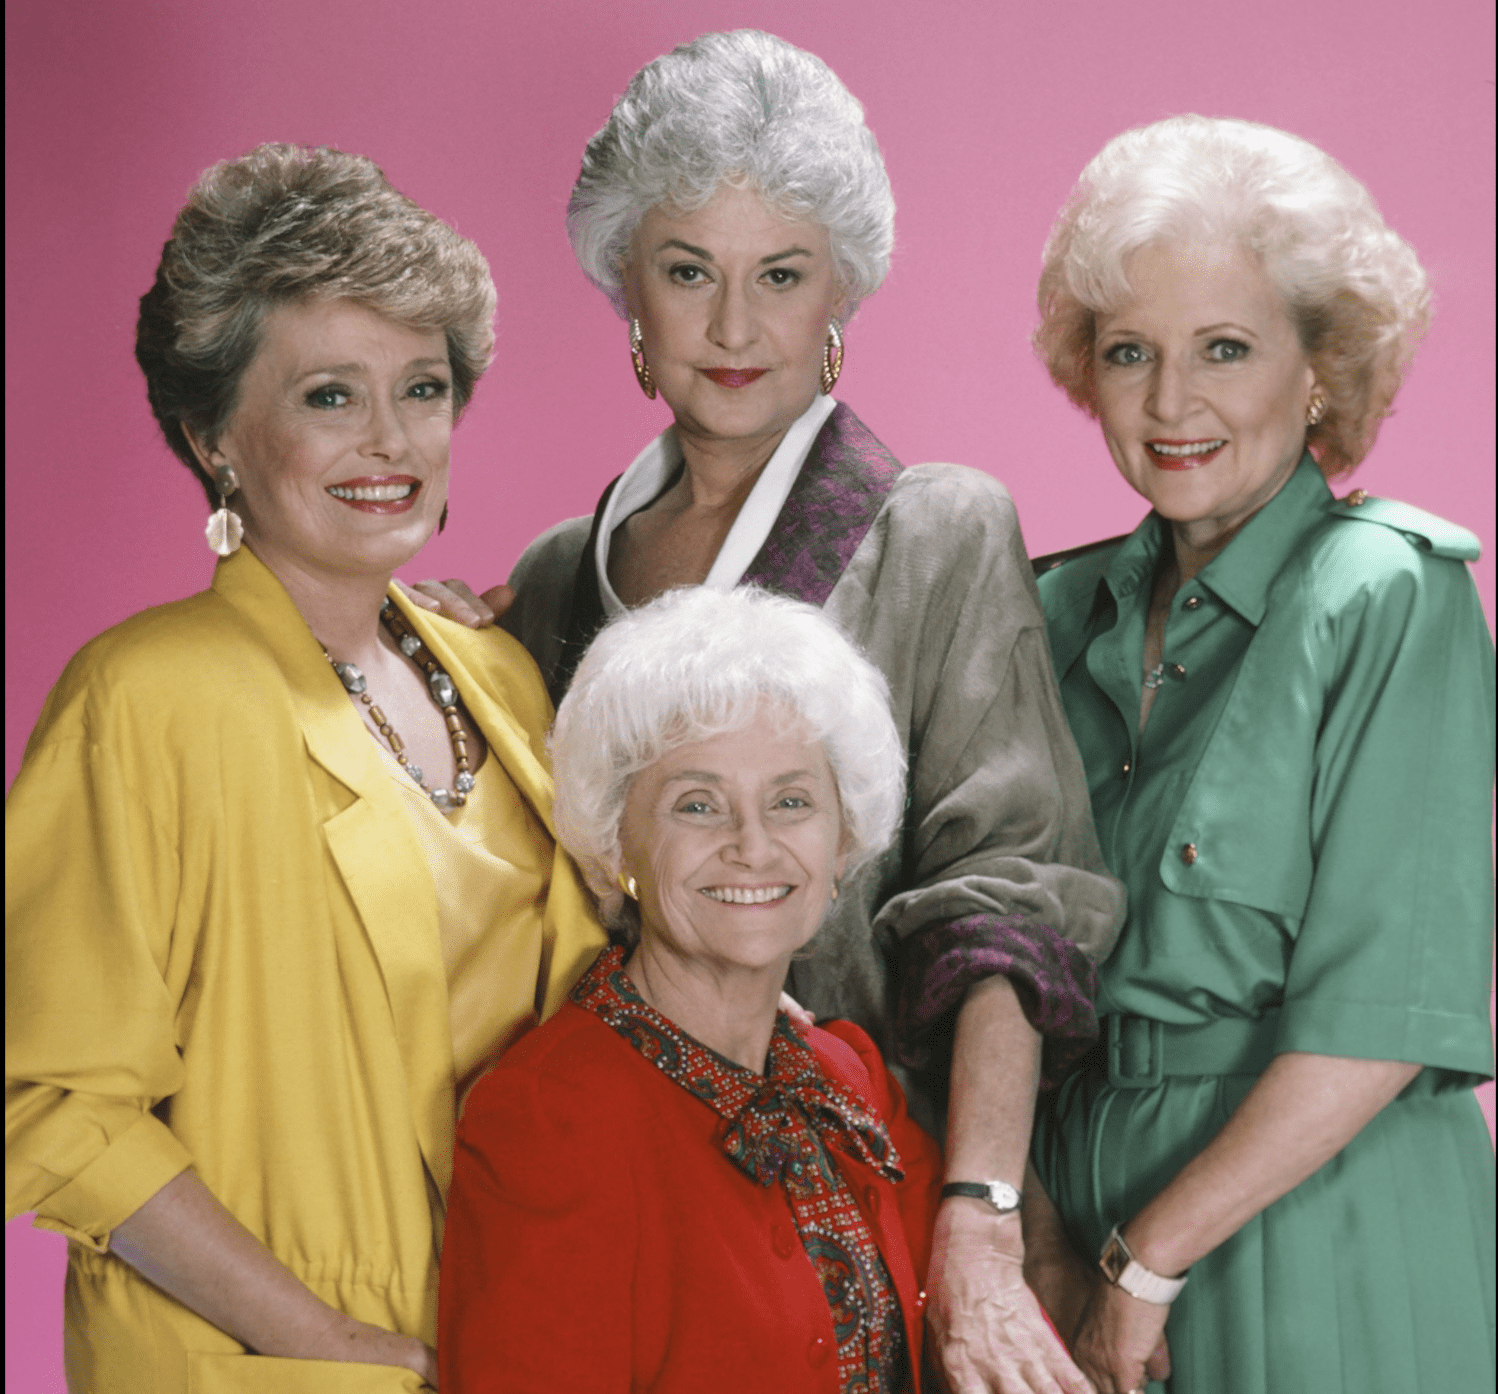 The main cast of the show The Golden Girls